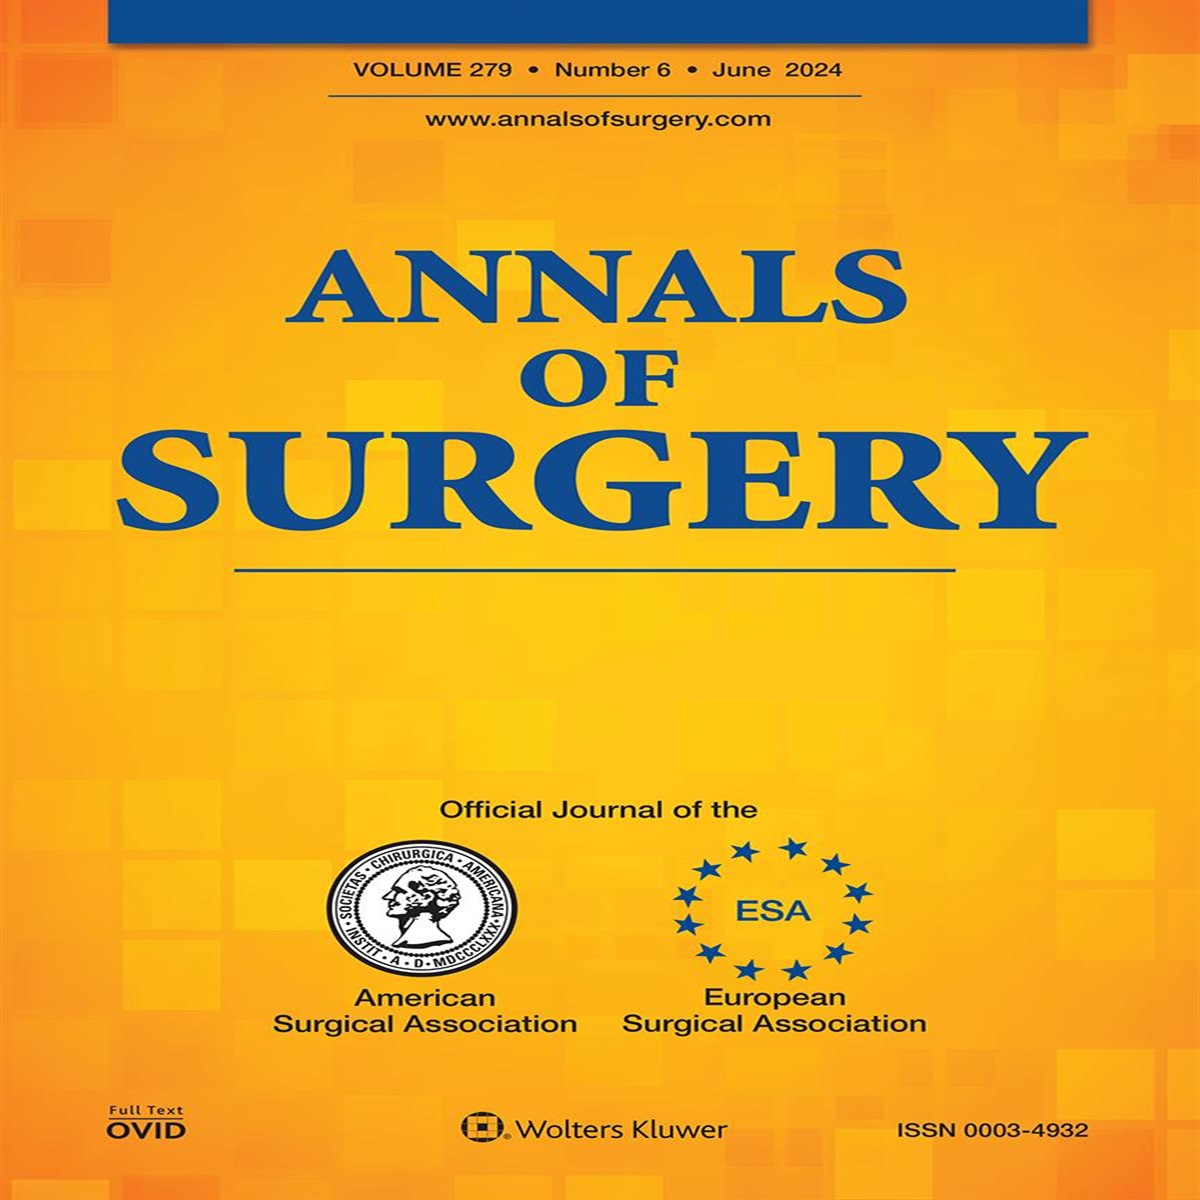 Trust-building: Why Virtual Formats Threaten the Moral Ends of Surgical Informed Consent